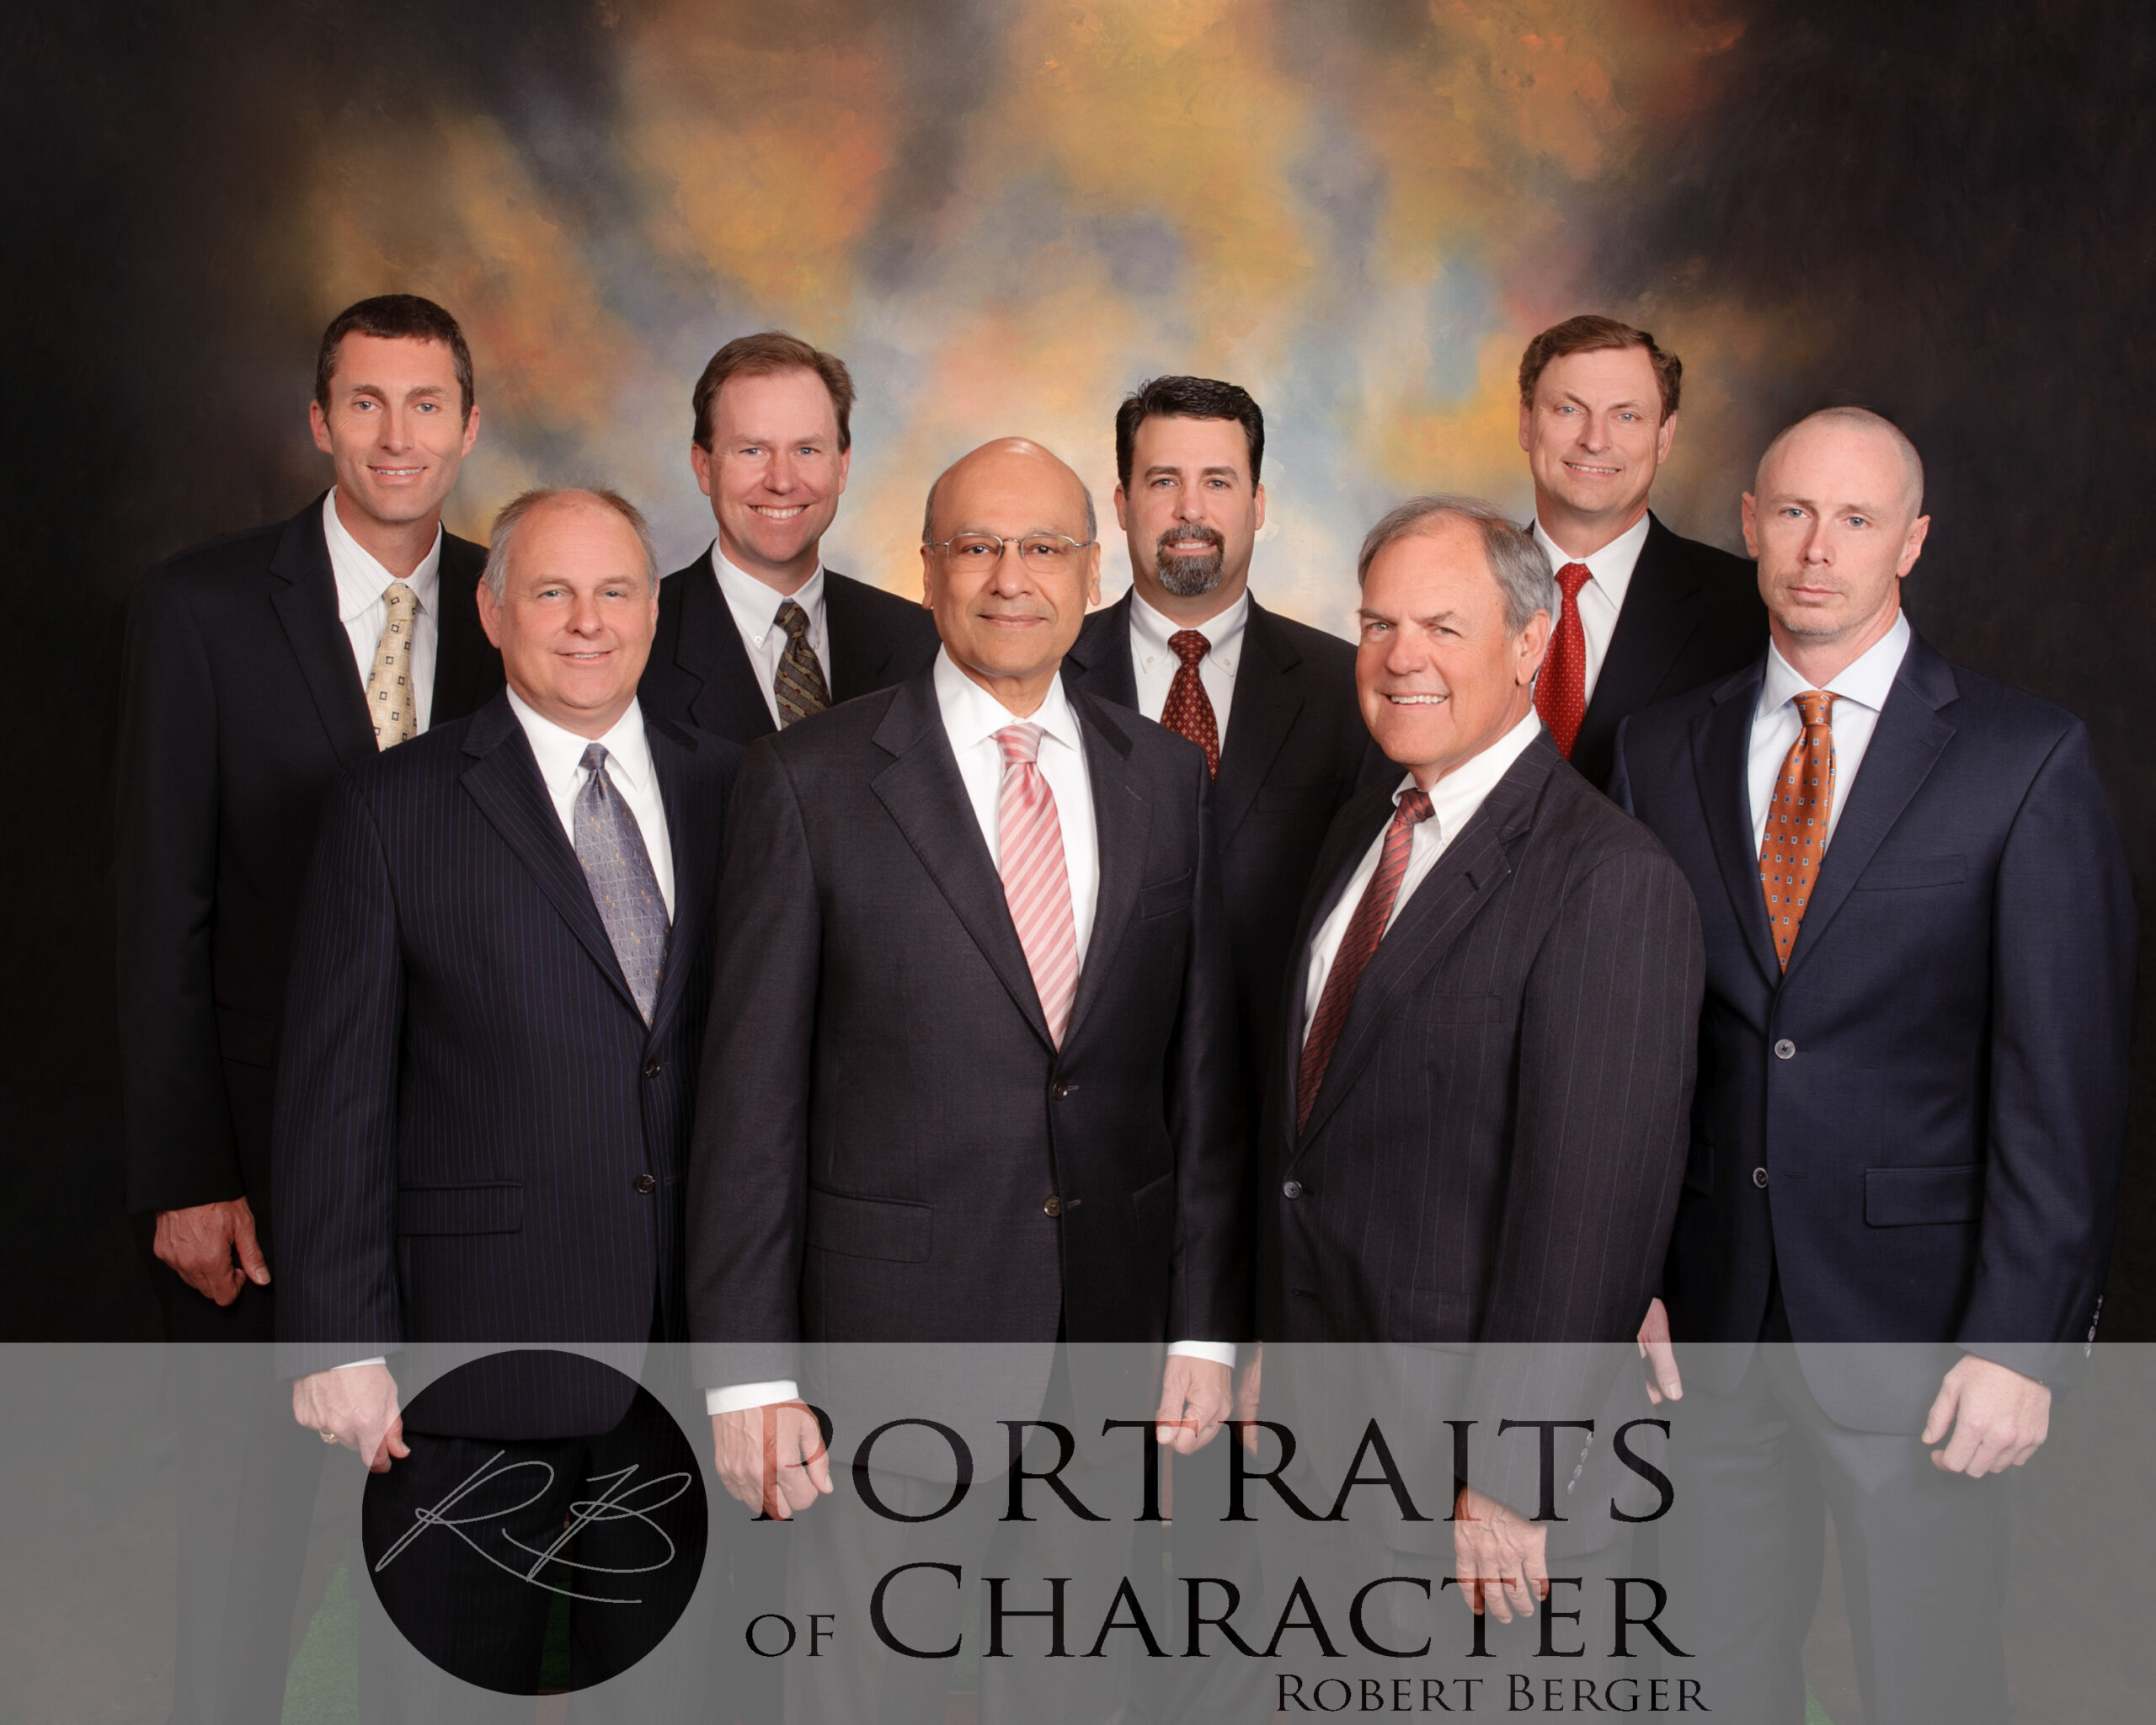 Houston Corporate Group Photography Houston Family Portrait Photography Studio Innovative Images Photography by Robert Berger serving Houston Katy Fort Bend Sugarland Memorial Spring Branch The Woodlands Texas 11211 Richmond Ave Suite B101 Houston TX 77082 Houston family photographer for Children Kids Infants Portrait Photography Studio Portraits of Character by Robert Berger Innovative Images Photography by Robert Berger